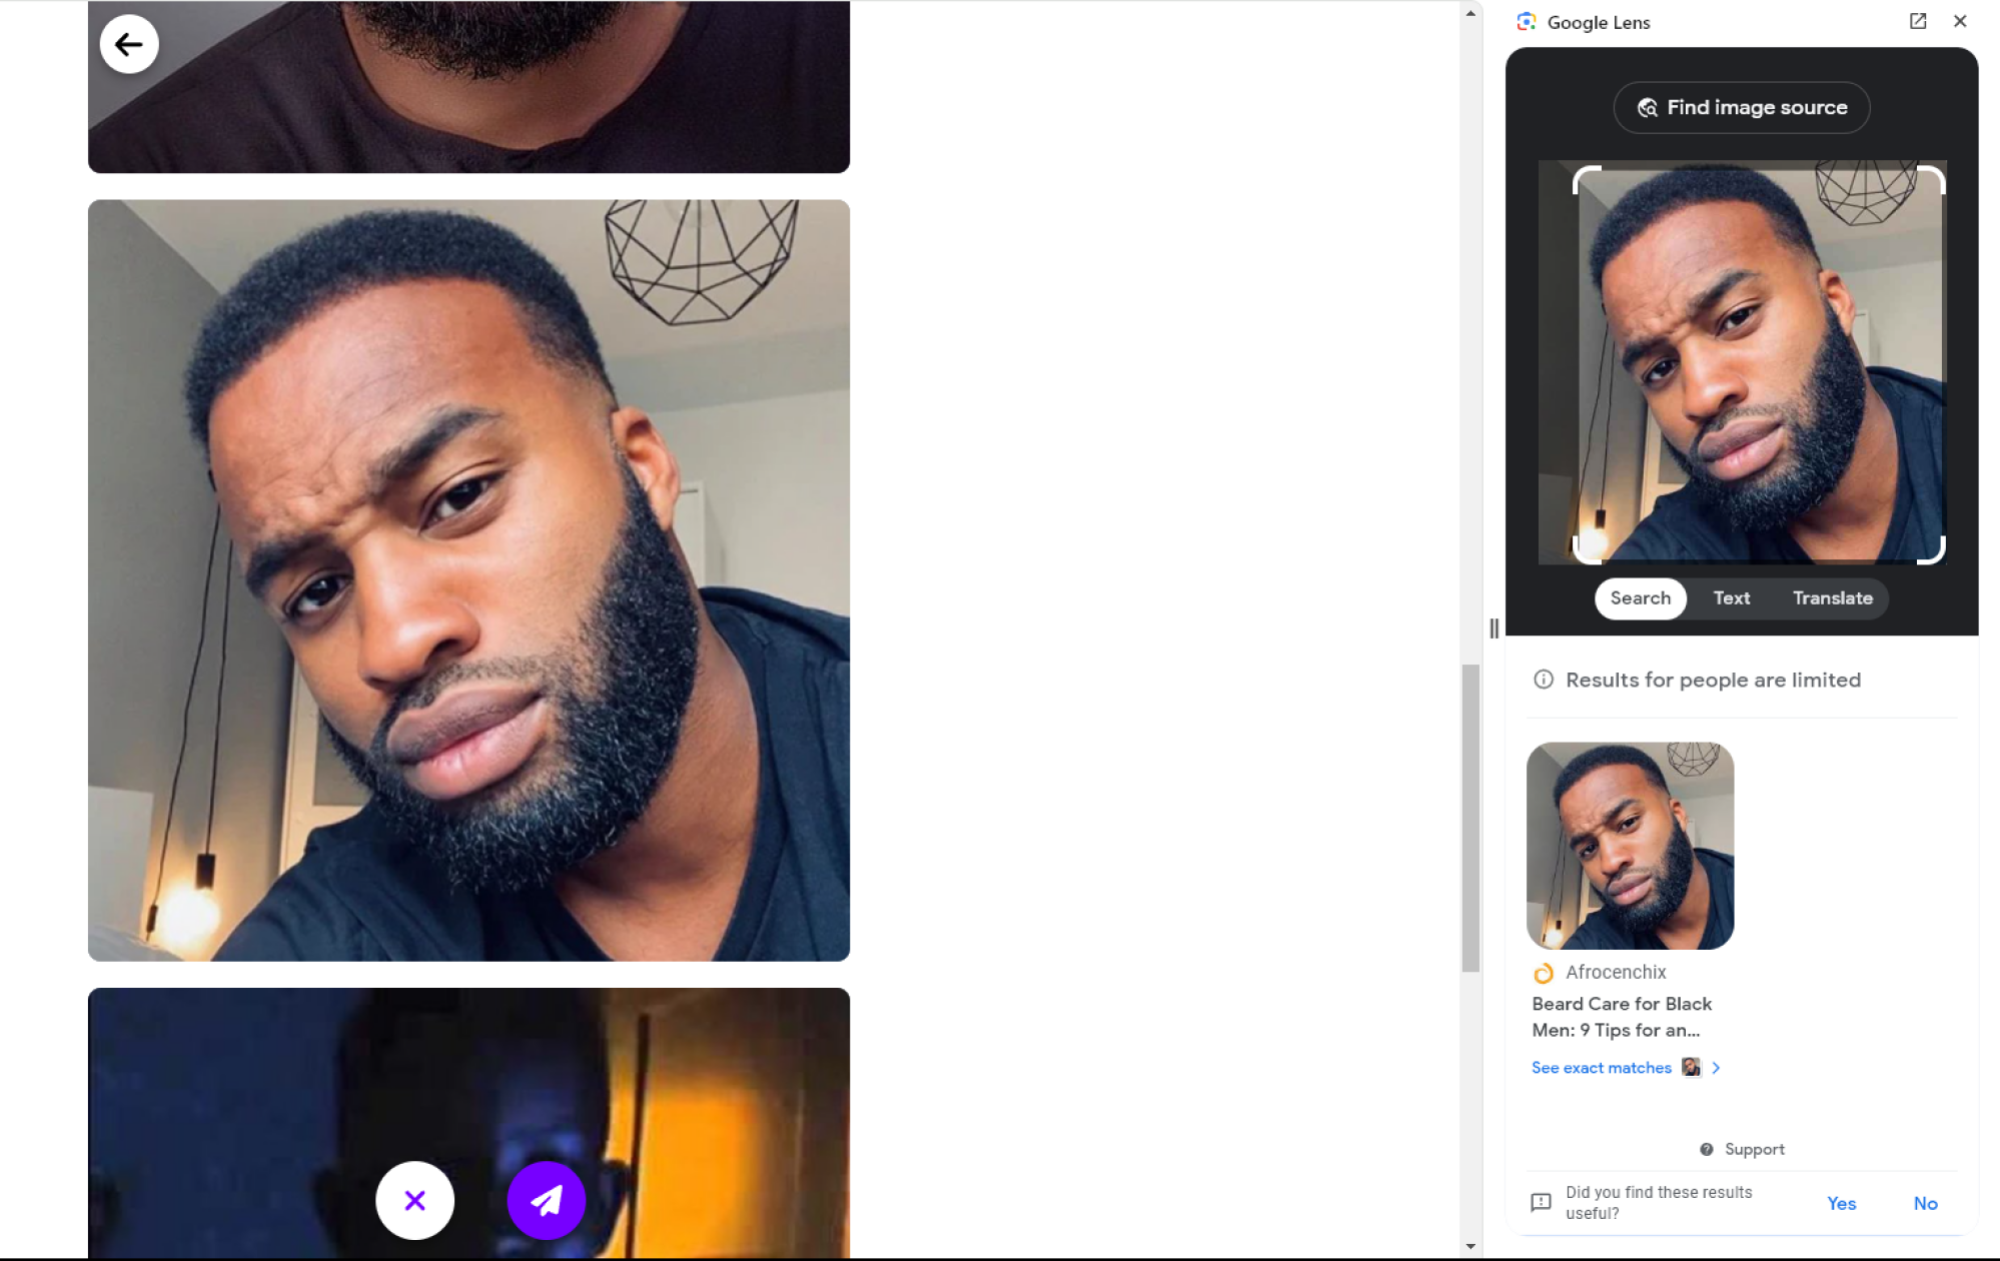 User profile with photos - A user profile on Duolicious showing several photos of a man with a beard, with the option to find the image source using Google Lens on the right side of the screen.